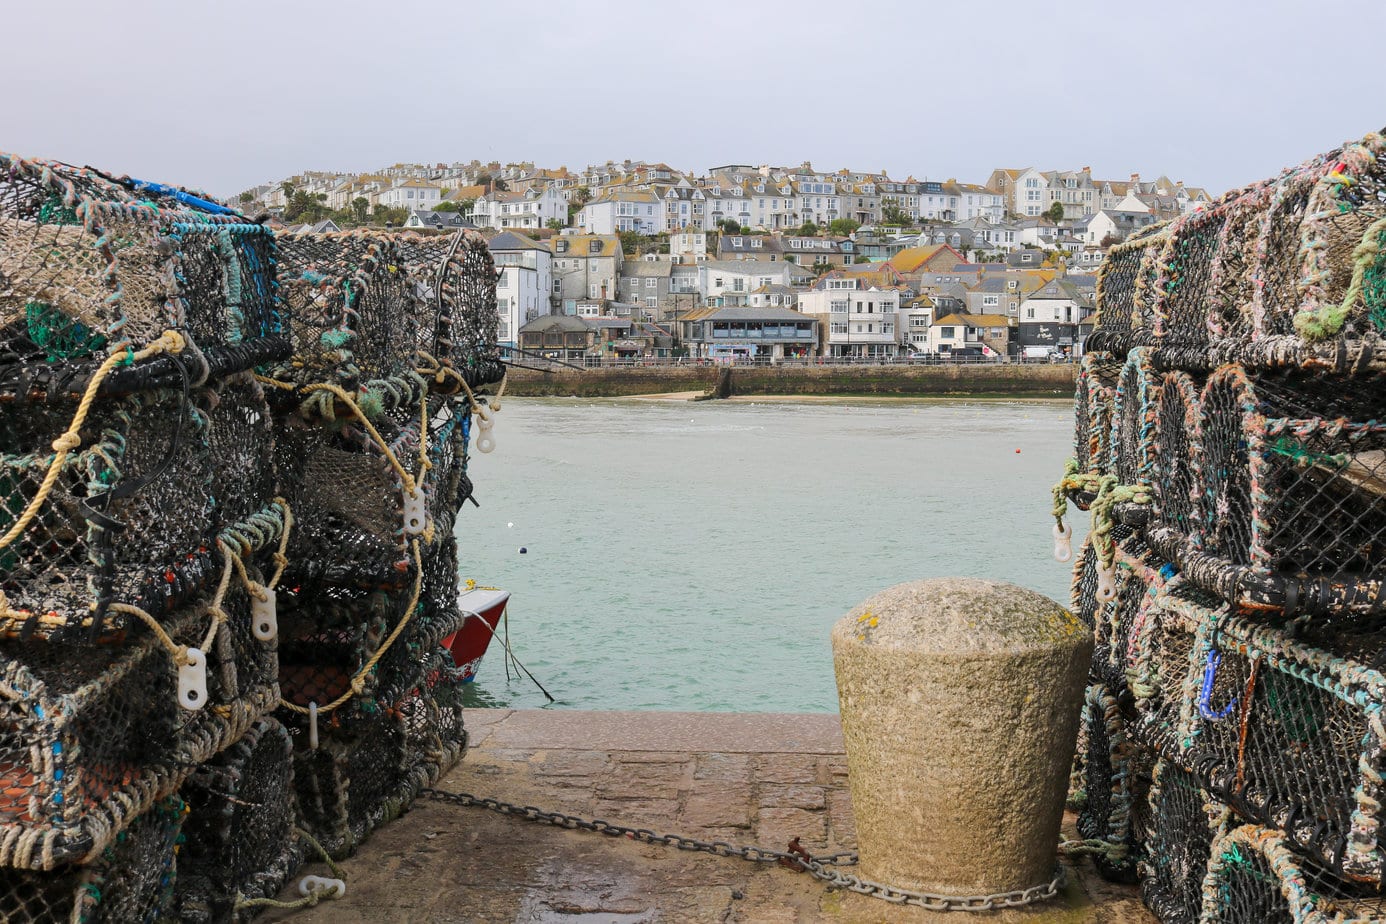 looking between two large stacks of netted fishing cages at a harbour on a grey day with a small town on a hill on the far side - what to do in st ives cornwall england 